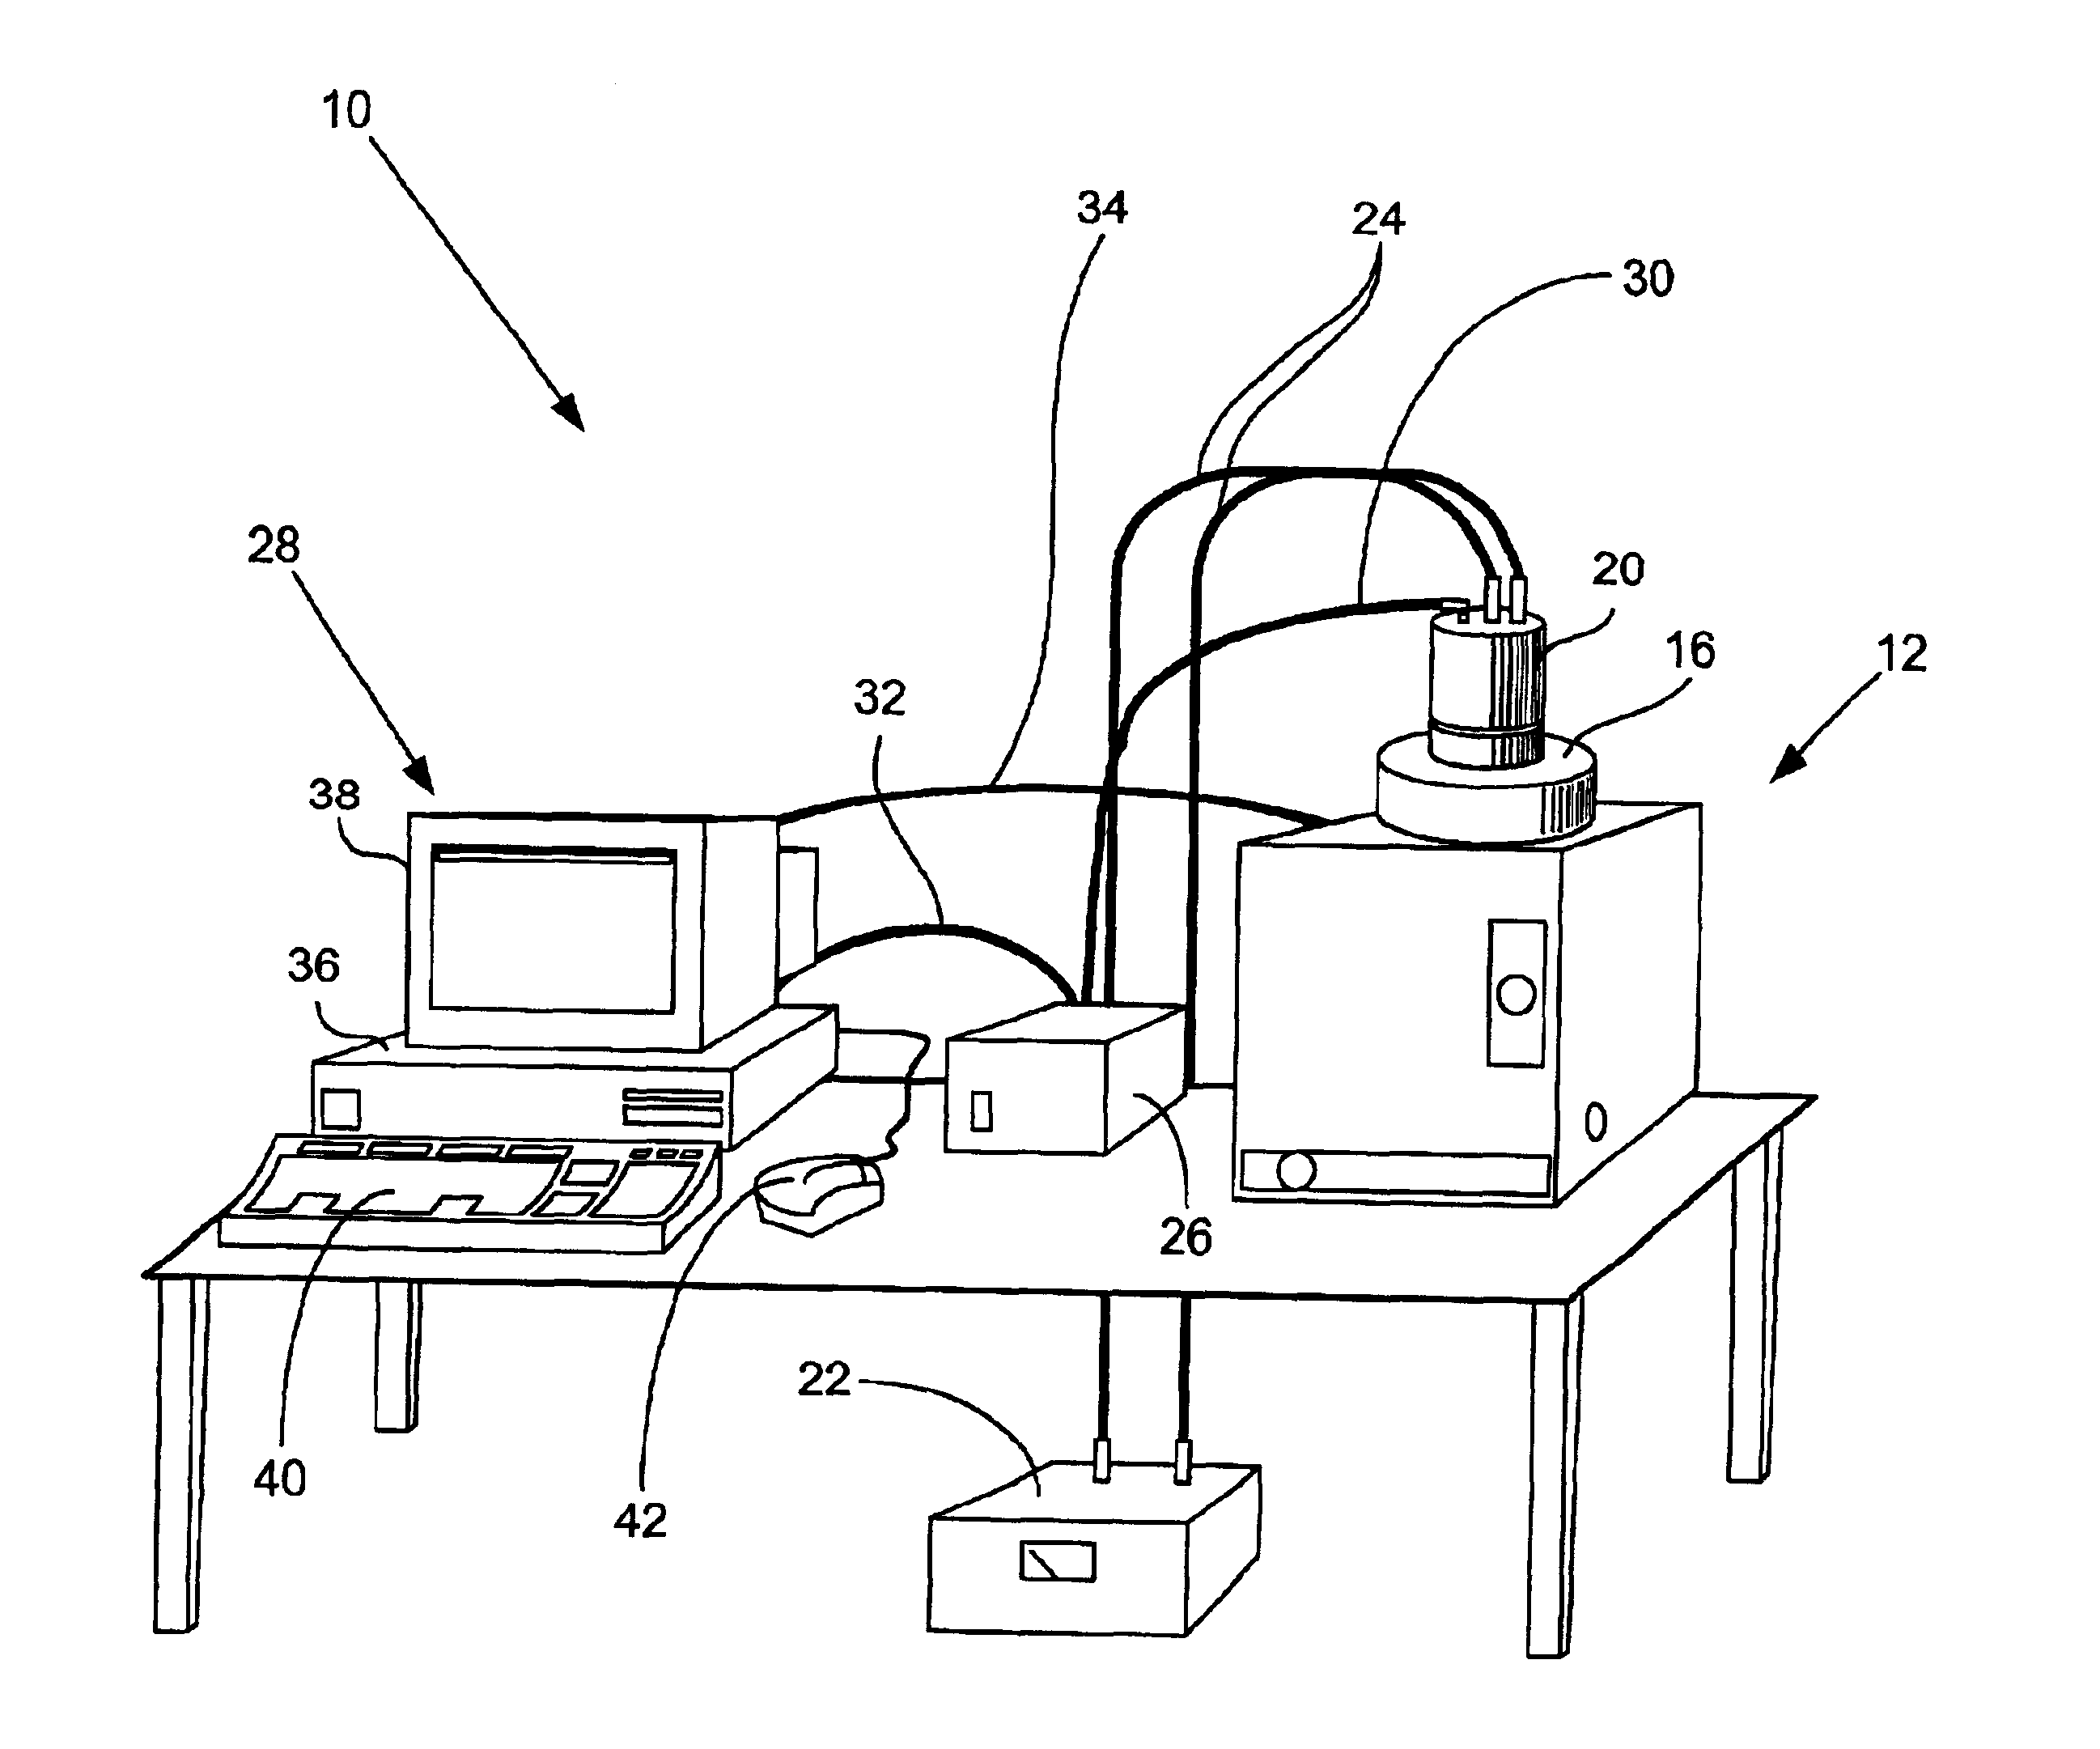 Light calibration device for use in low level light imaging systems